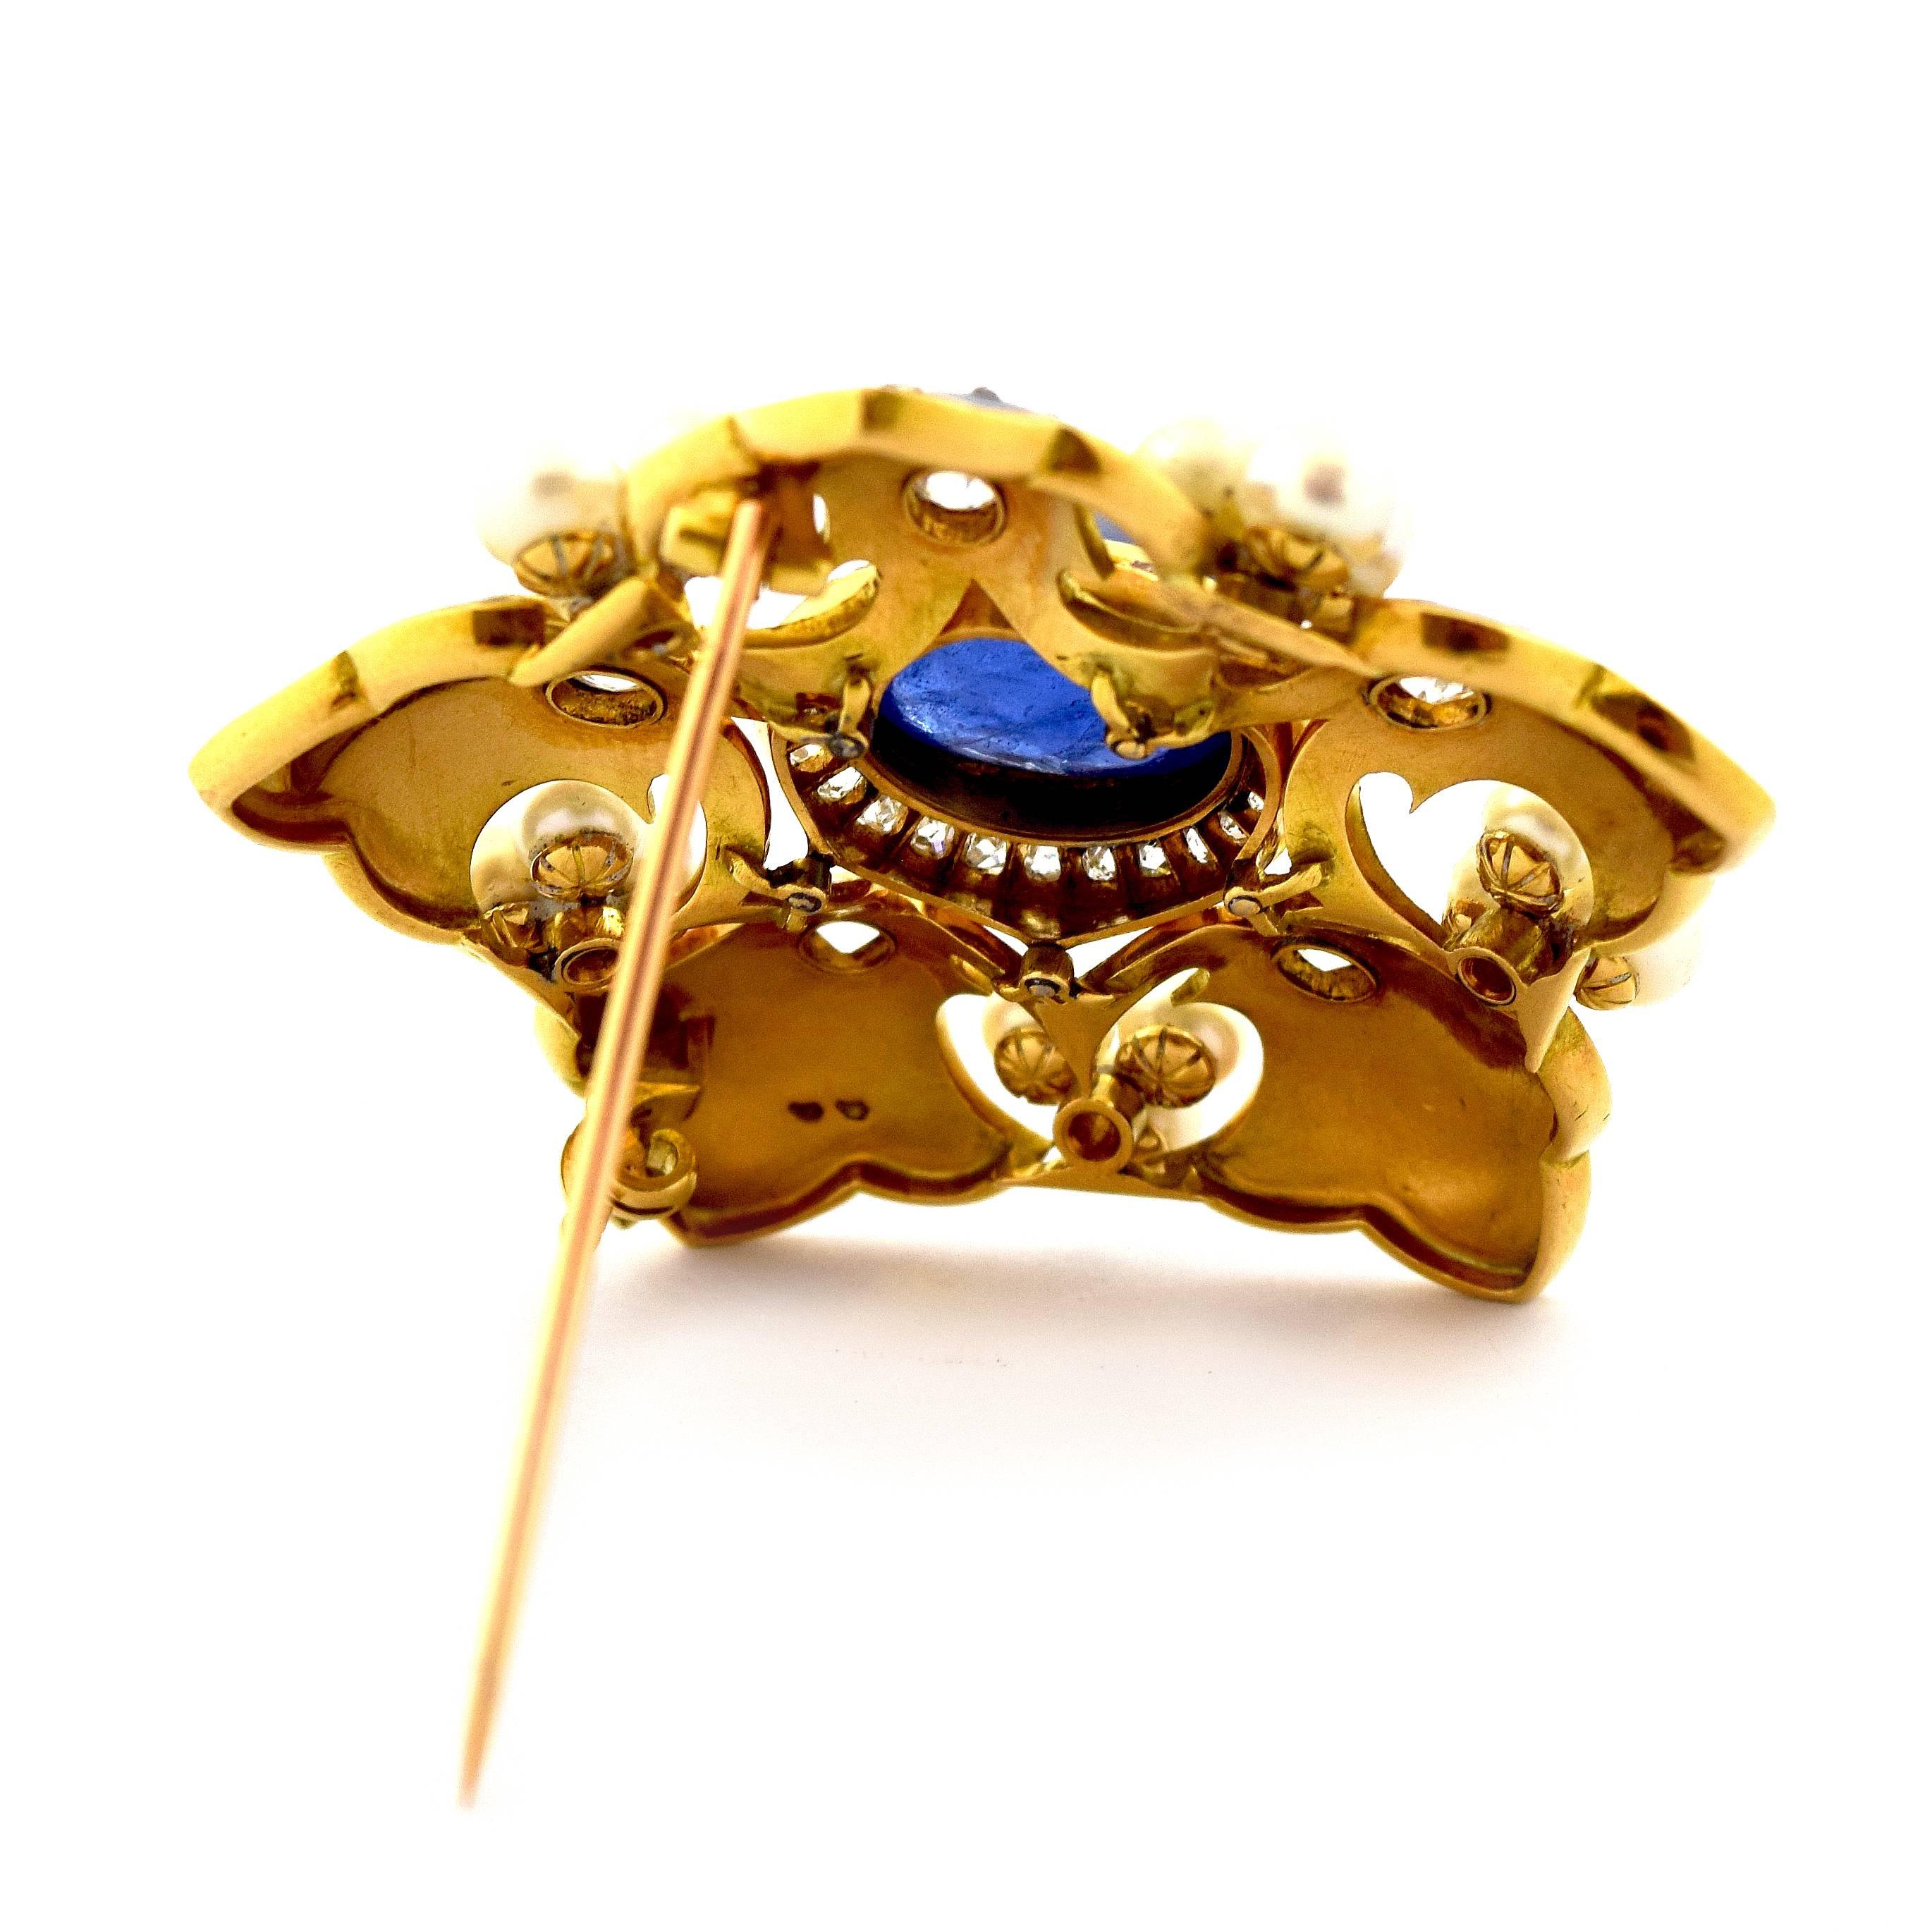 Vintage French 18k Yellow Gold  French hallmarked  
Blue Enamel, pearls and Old European cut diamonds to create this beautiful creation 
Pin Brooch.
4 old cushion-cut diamonds approximately 0.20ct each.
15 white pearls.
6 small old cut